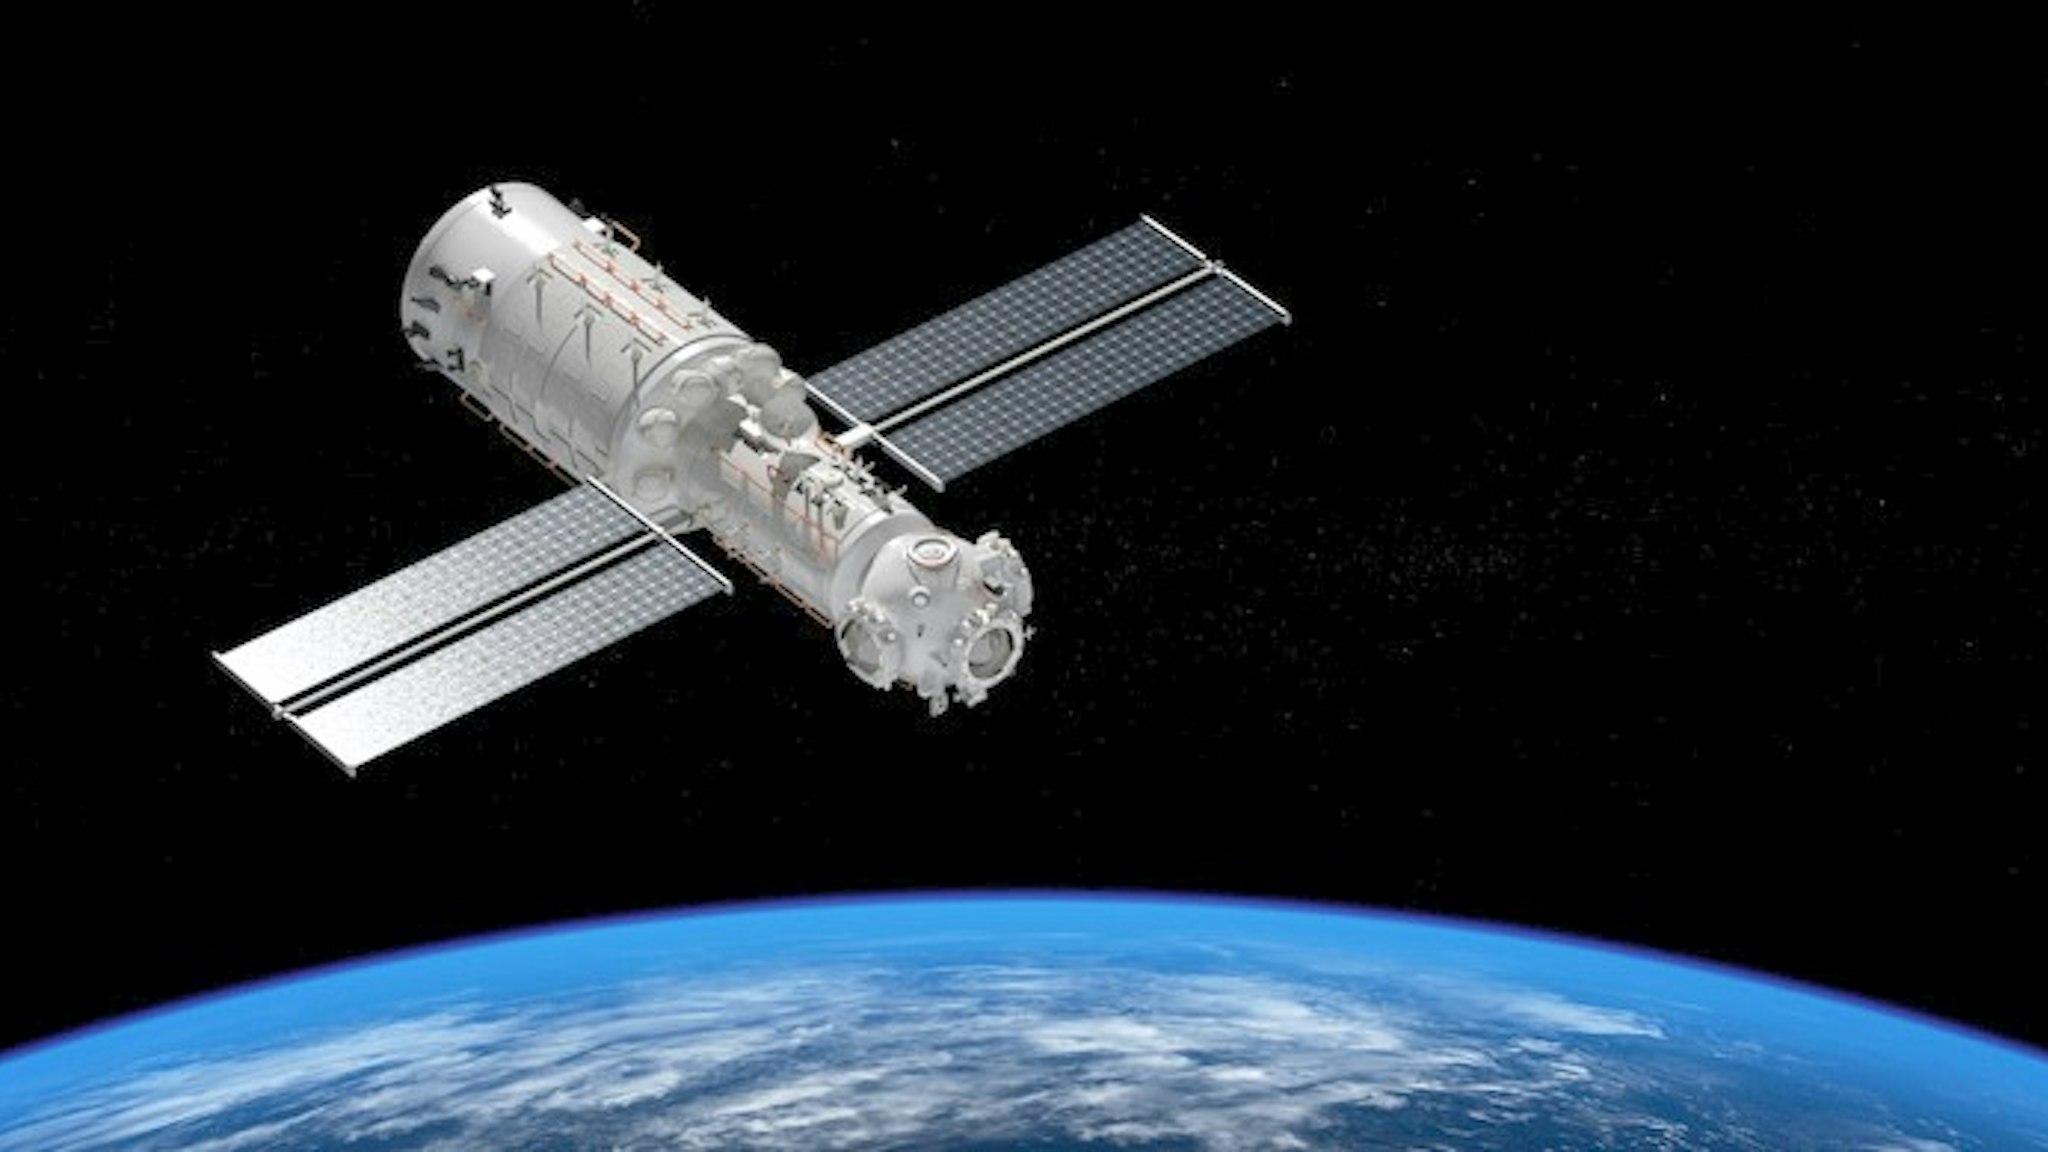 Core module of China's space station Tianhe orbiting Earth